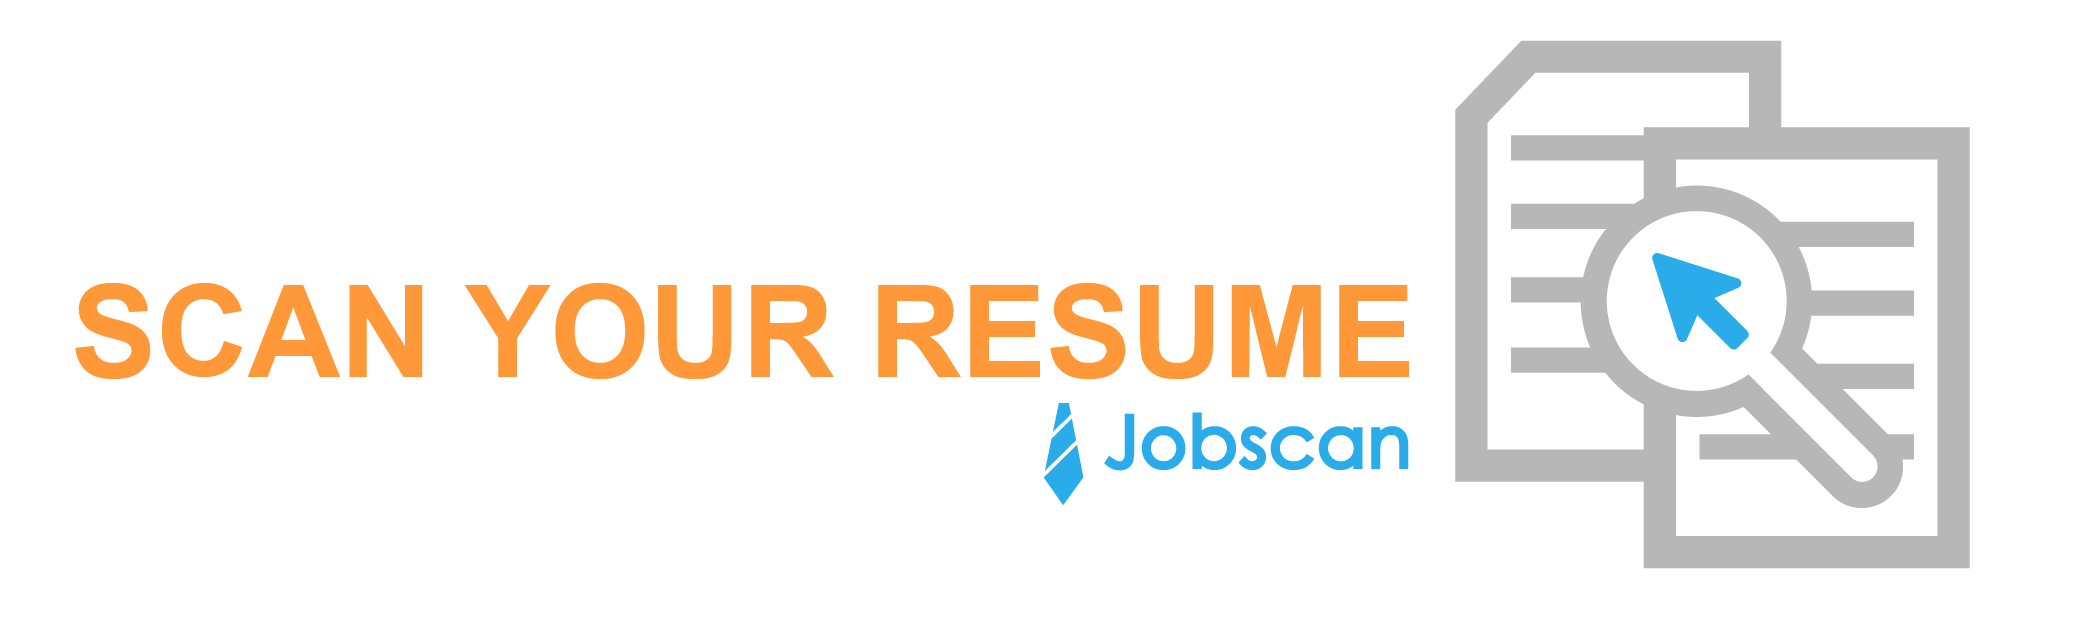 Scan your military to civilian resume with Jobscan.